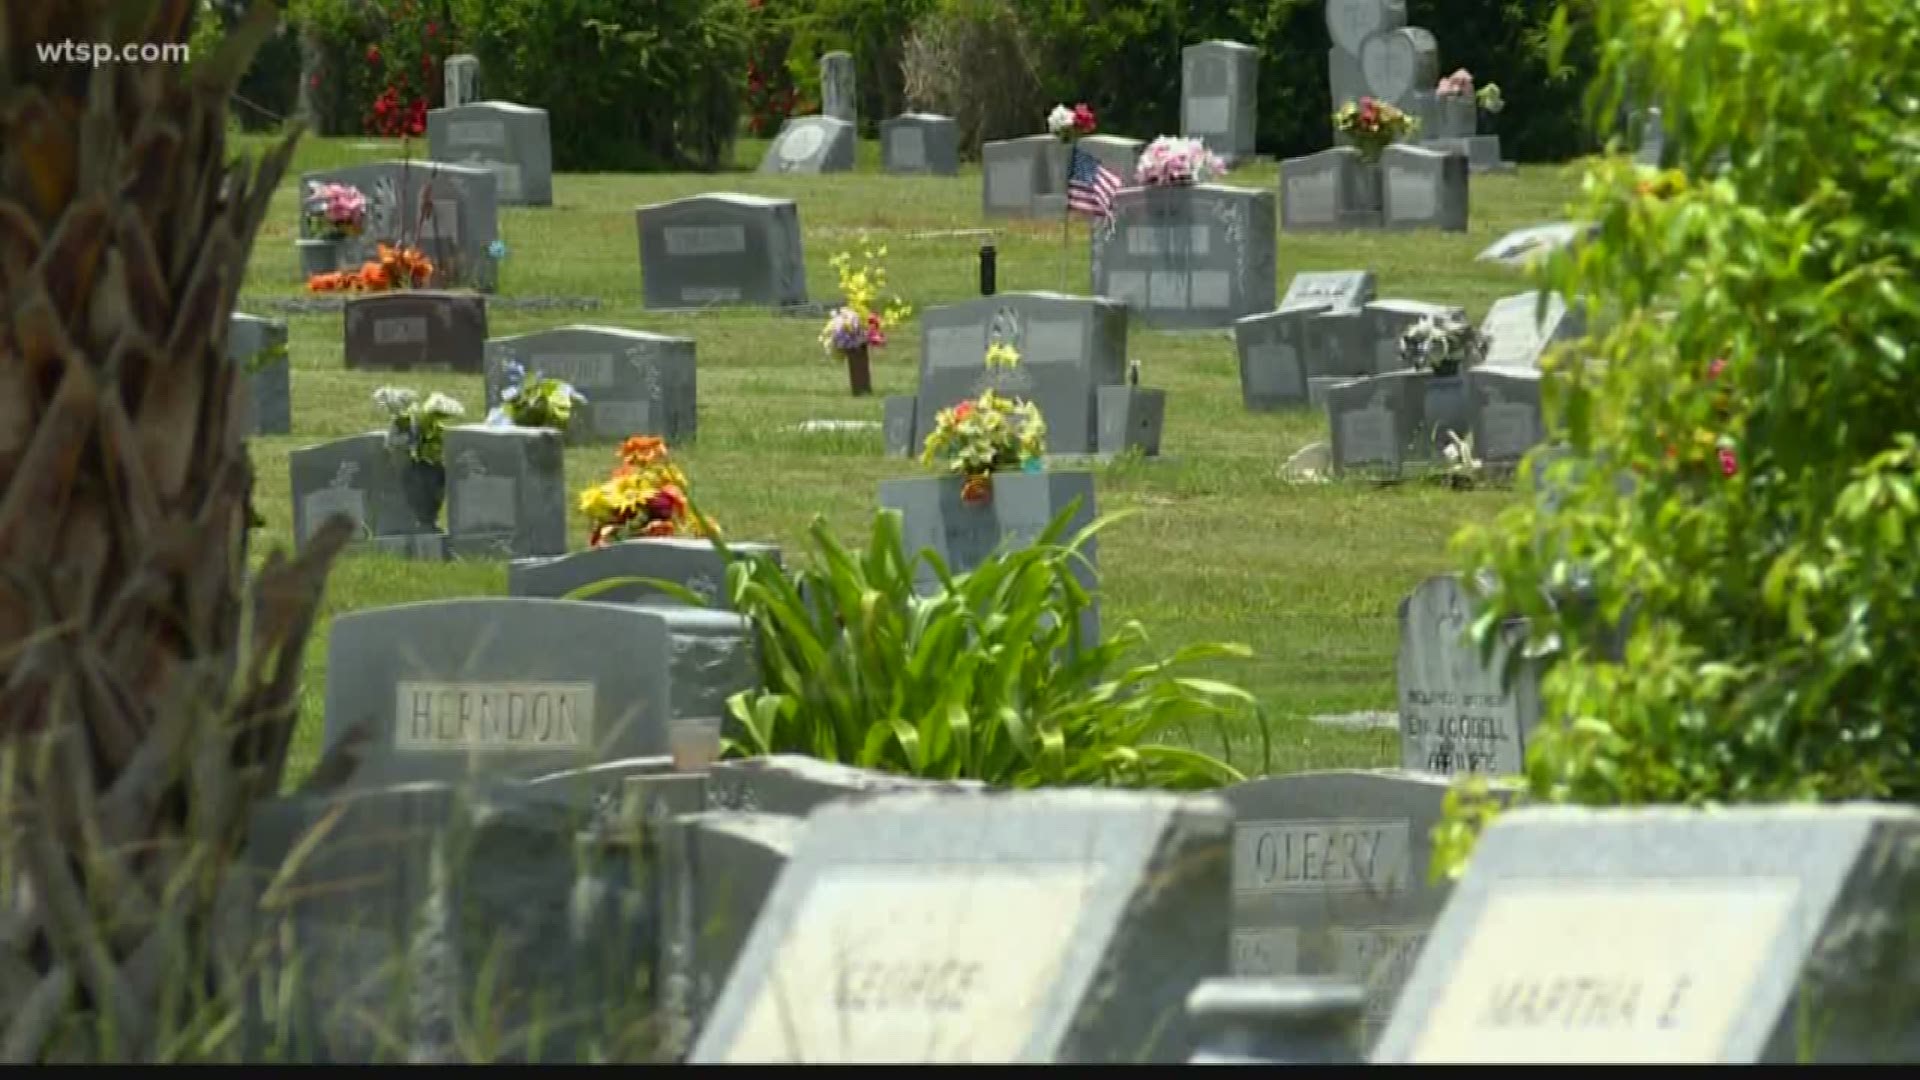 Haines City officials are trying to figure out what happened to people who once owned more than 300 gravesites at the city cemetery.

The burial plots have gone used for more than 50 years now, and if no one steps up to claim them soon, there’s a plan to declare them abandoned property. https://on.wtsp.com/2LWMvkn